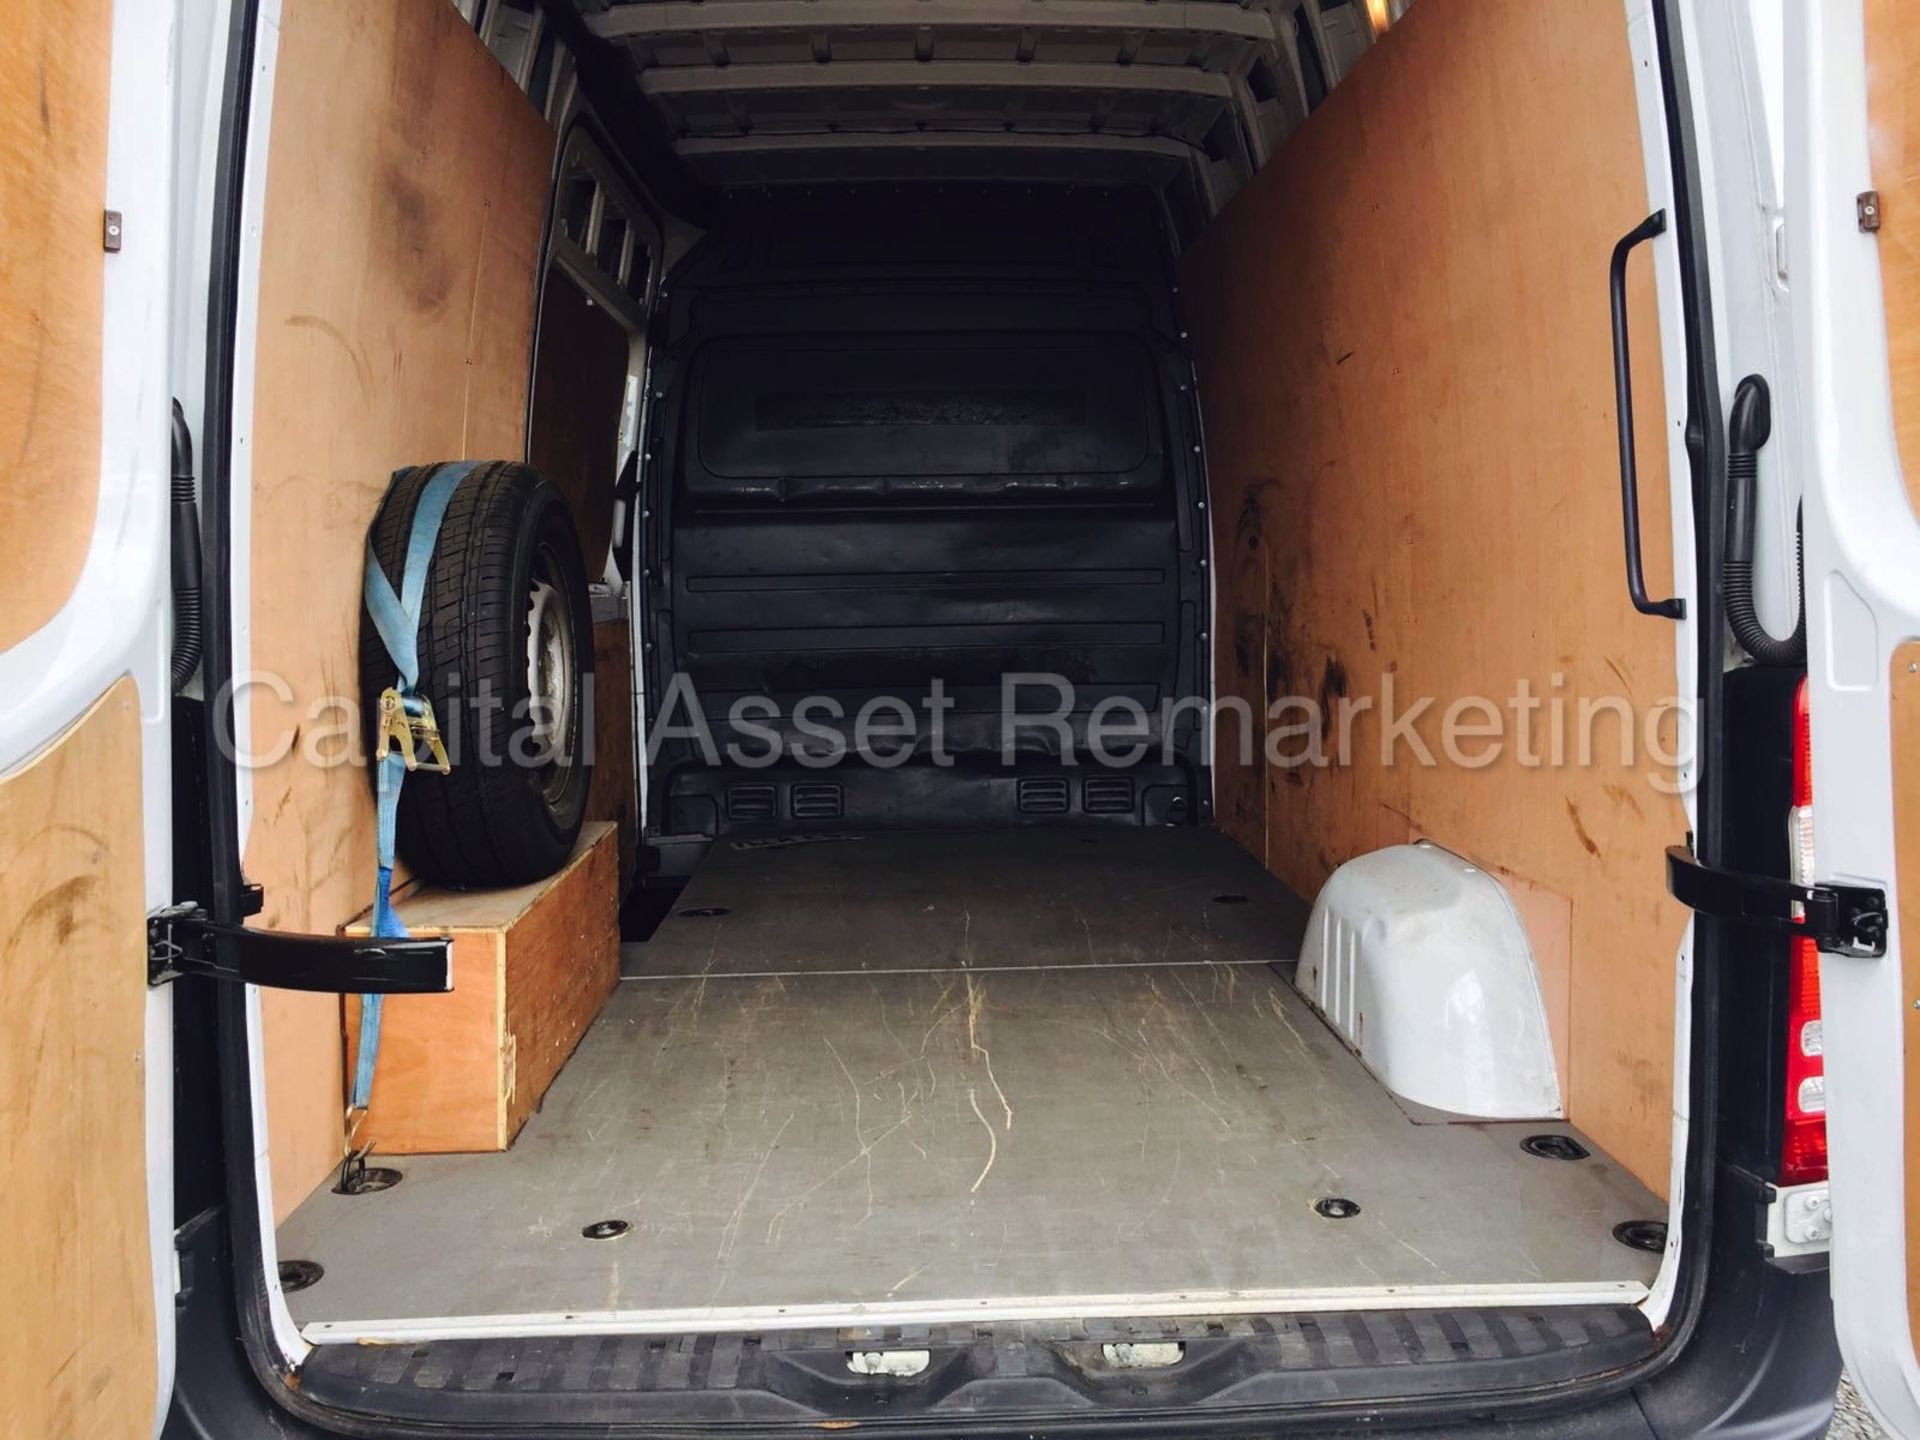 MERCEDES SPRINTER 313CDI "130BHP - 6 SPEED" FACELIFT MODEL / NEW SHAPE (2014 YEAR) 1 OWNER - Image 8 of 11